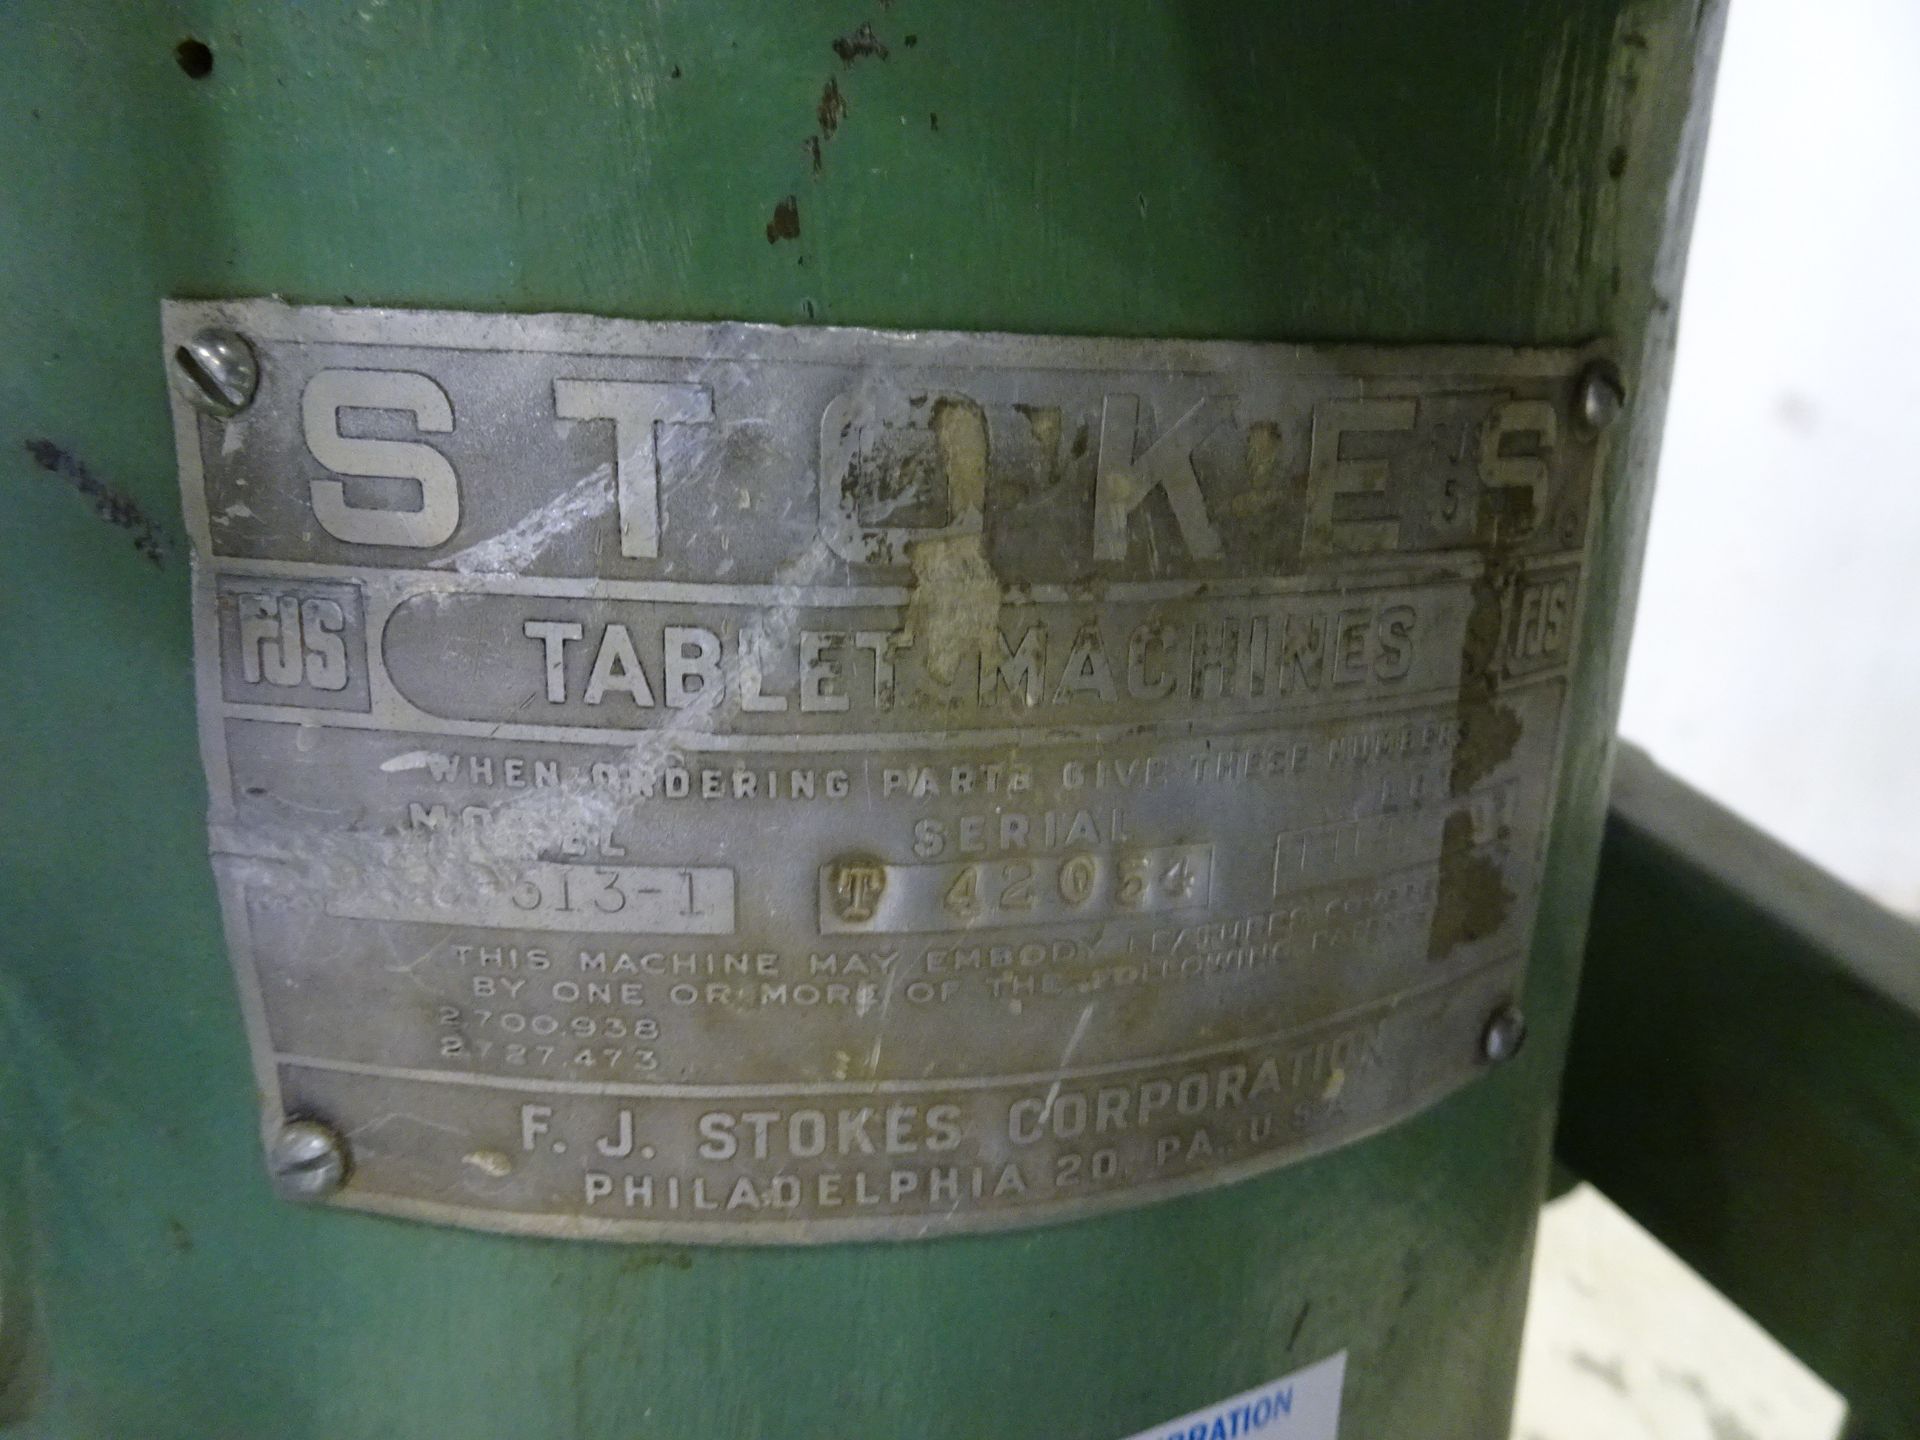 F.J. Stokes BB2 Tablet Press, Model 313-1 s/n T42054 1.5 Ton 24 Station Turret, (2) Feed Stations - Image 7 of 9